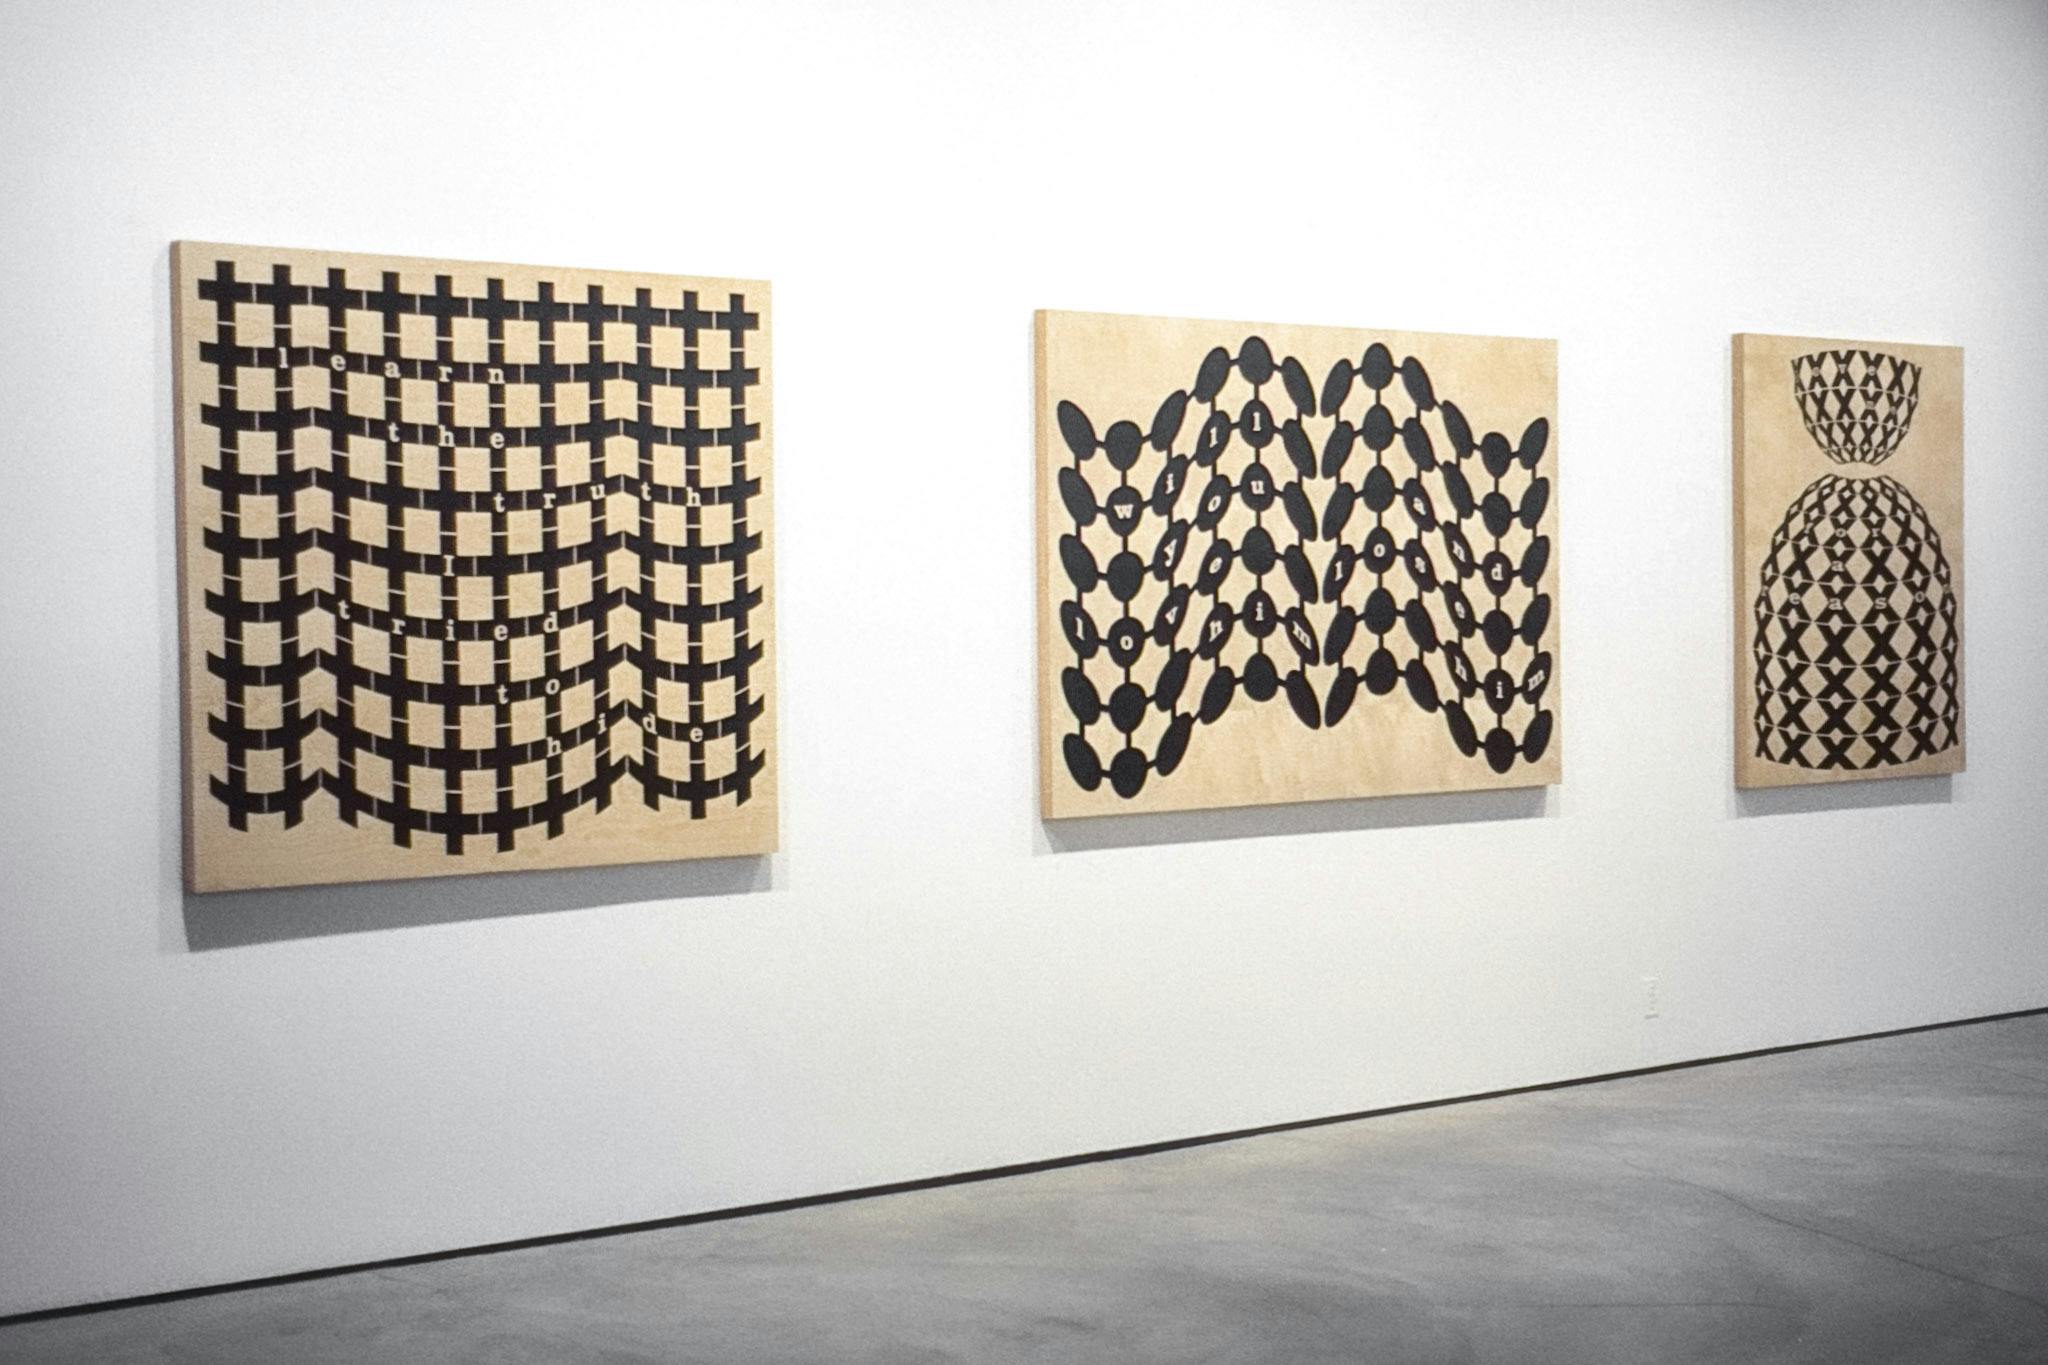 3 artworks on wood panels mounted on a white wall. They show black geometric patterns on natural wood with text. The work on the left has a grid pattern that reads "learn the truth I tried to hide." 